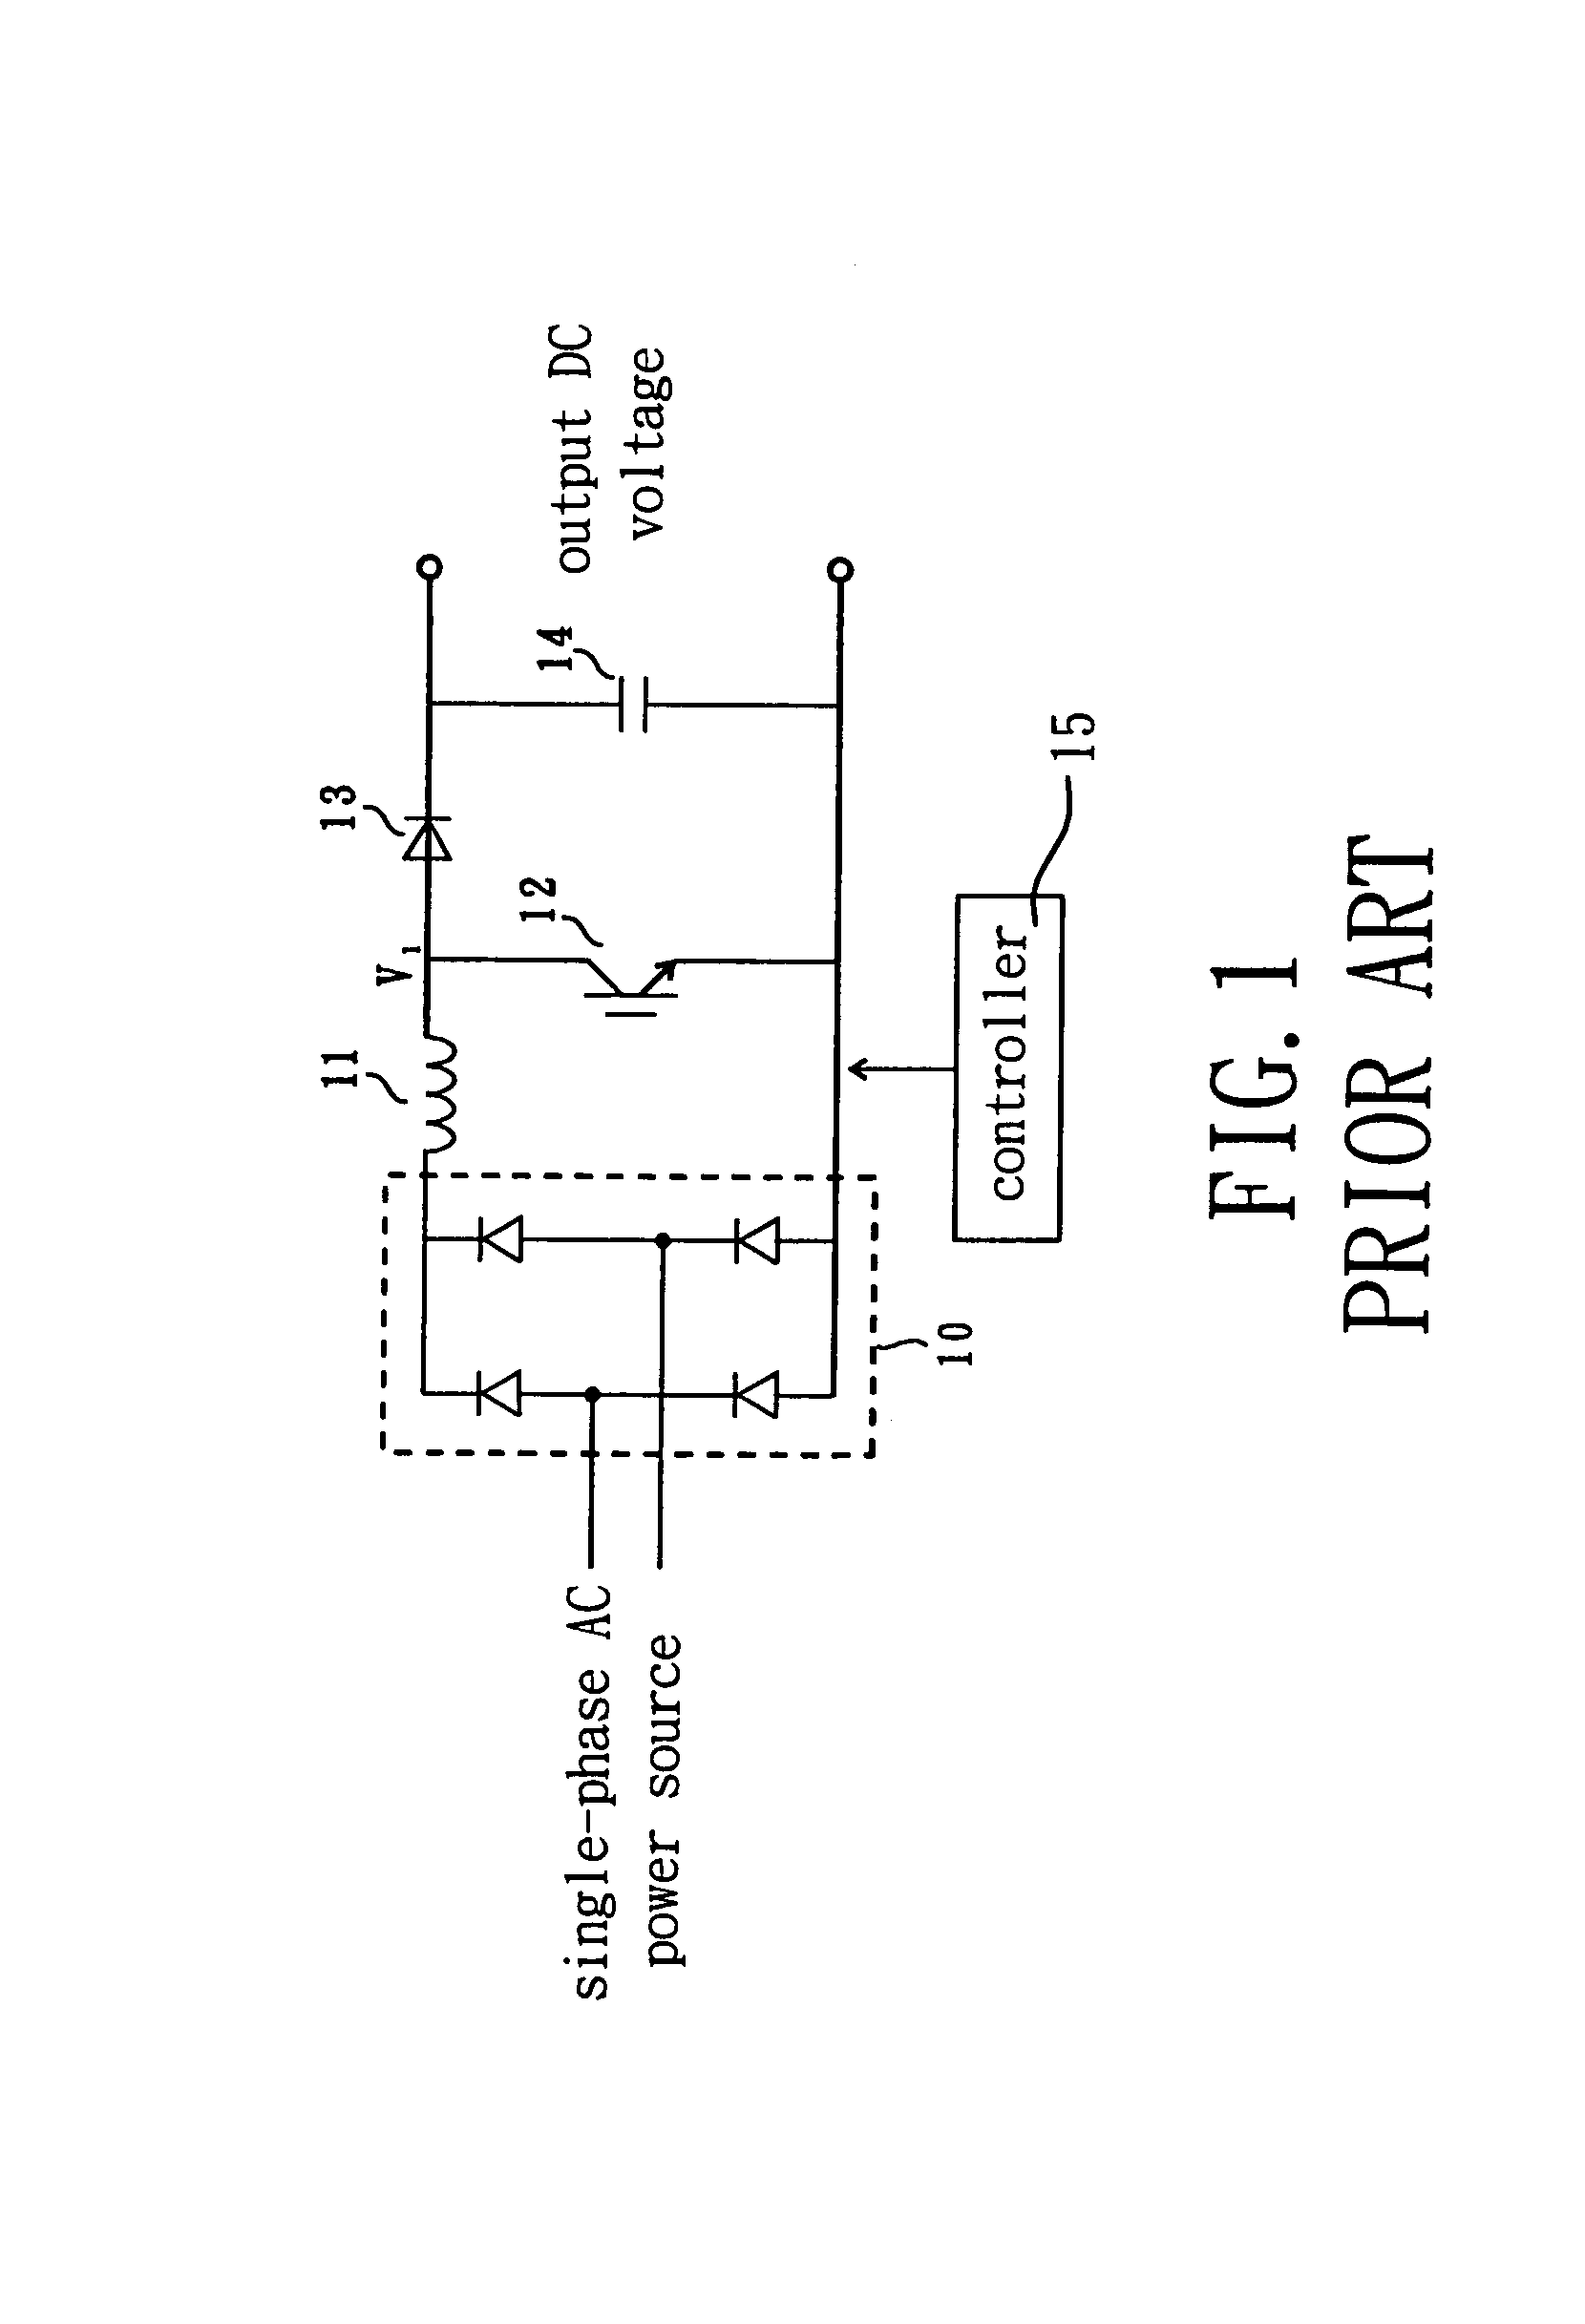 Control method of AC/DC power converter for input current harmonic suppression